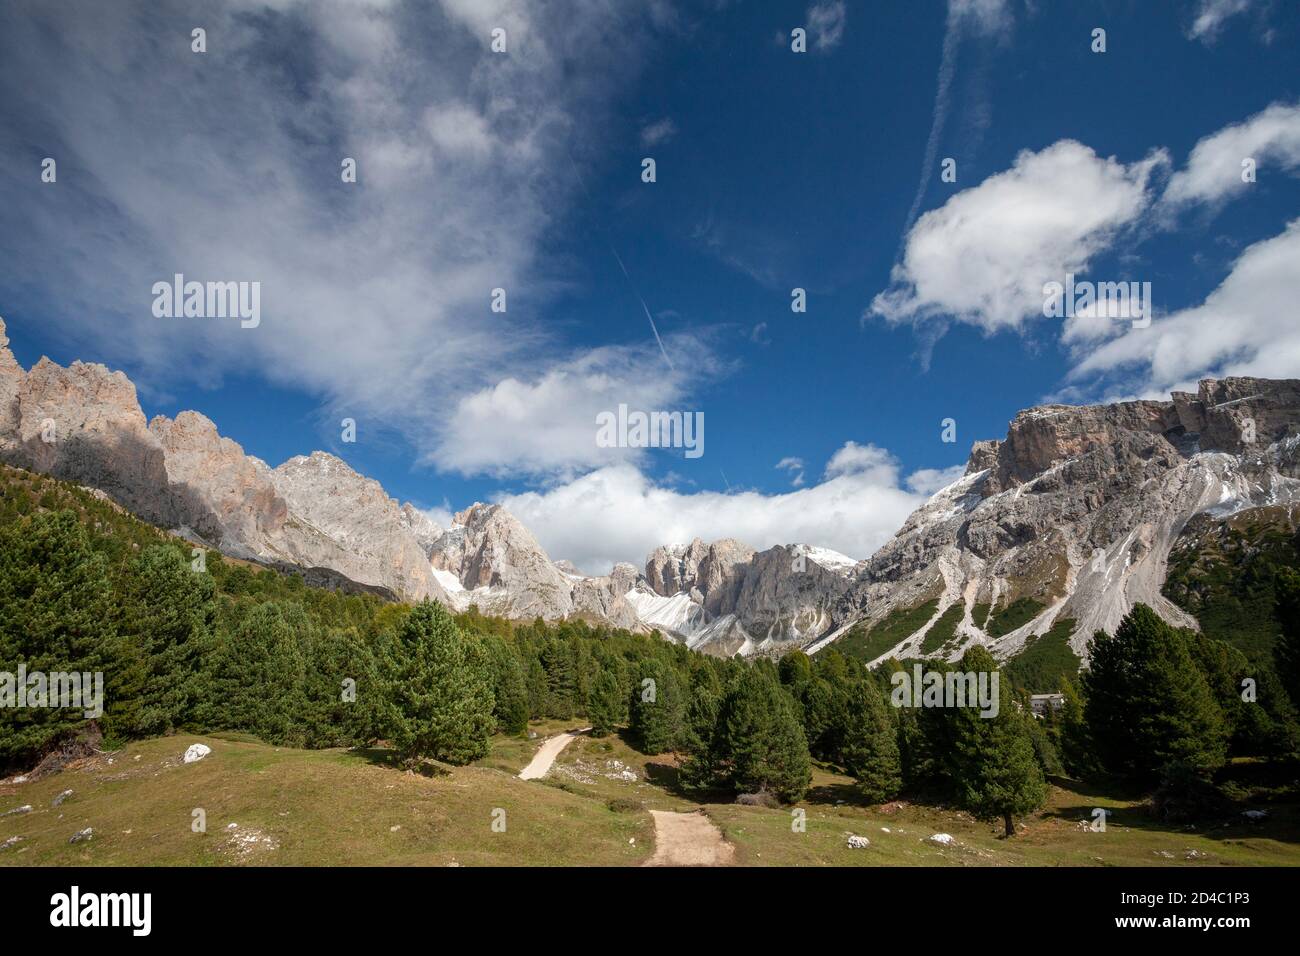 Views of hiking trails and trees, with the peaks of the Geisler group of mountains in the Italian Dolomites, in the Alps, South Tyrol, Italy Stock Photo